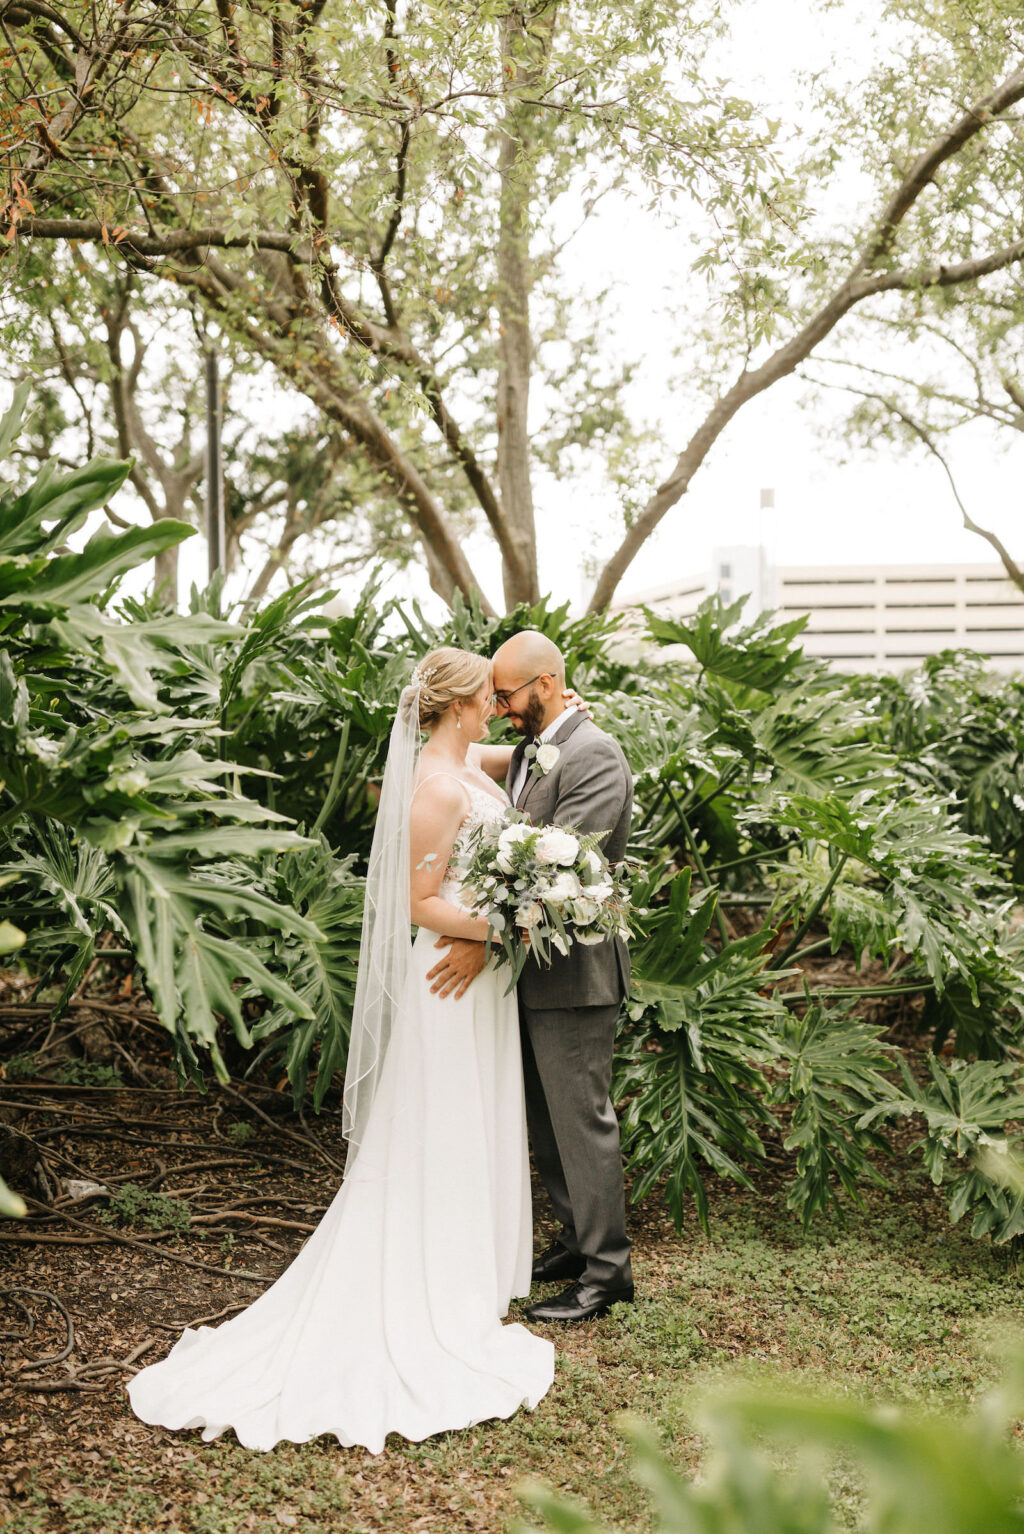 Bride and Groom Outdoor Portrait | Sheath Satin Charmeuse V Neck Lace Bodice Spaghetti Strap Bridal Gown | Groom Wearing Classic Charcoal Grey Suit | Greenery and White Bridal Bouquet